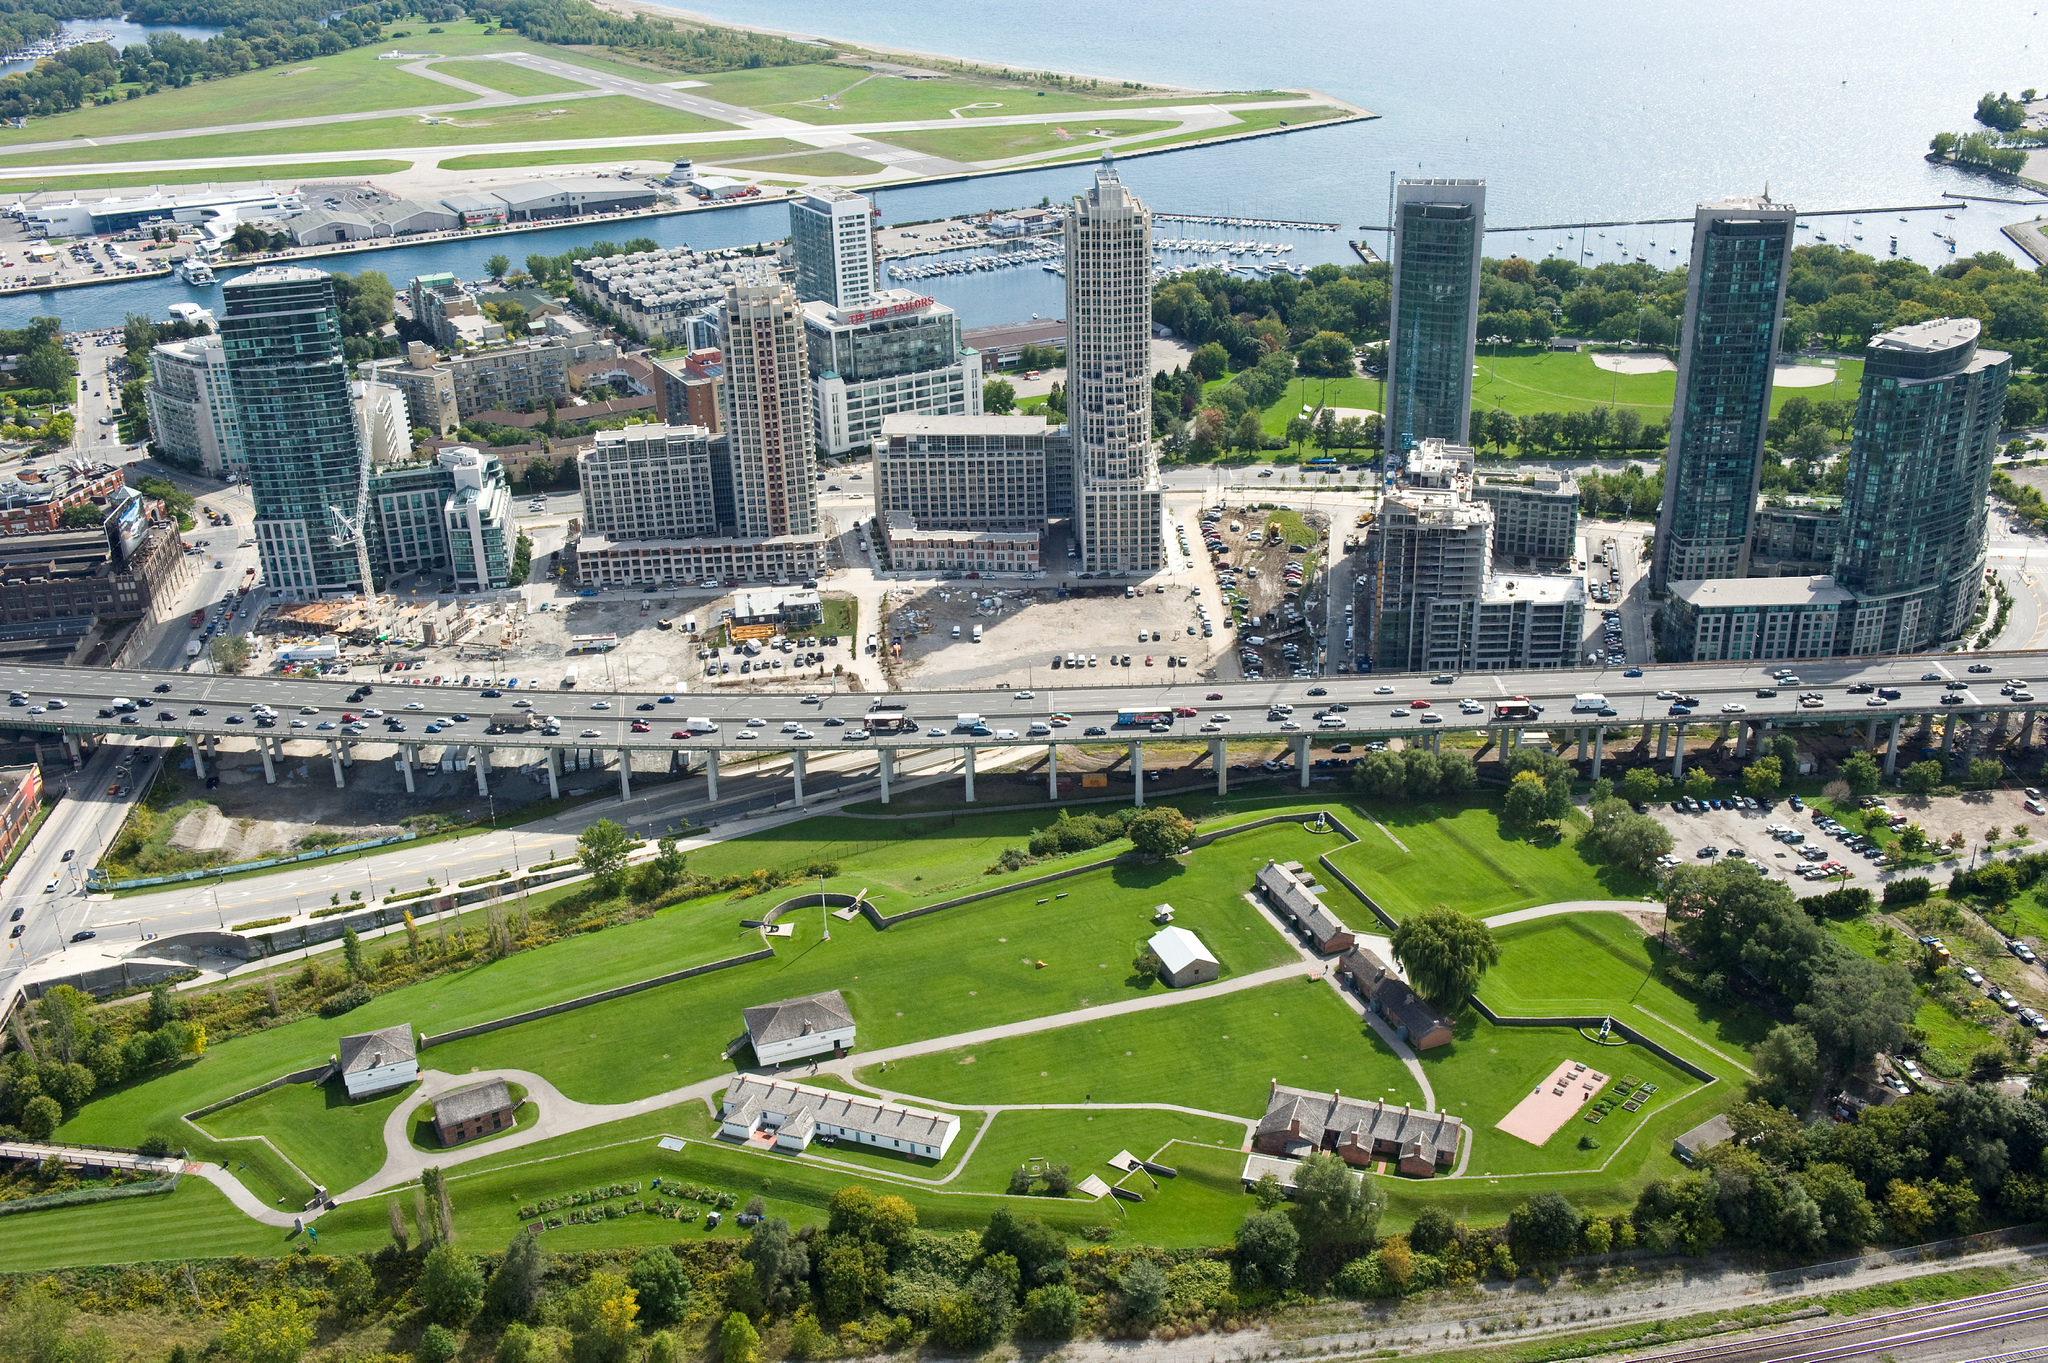 Aerial view of Fort York. We can see the Gardiner Expressway, Billy Bishop Airport, Toronto Waterfront & abundant green-spaces.